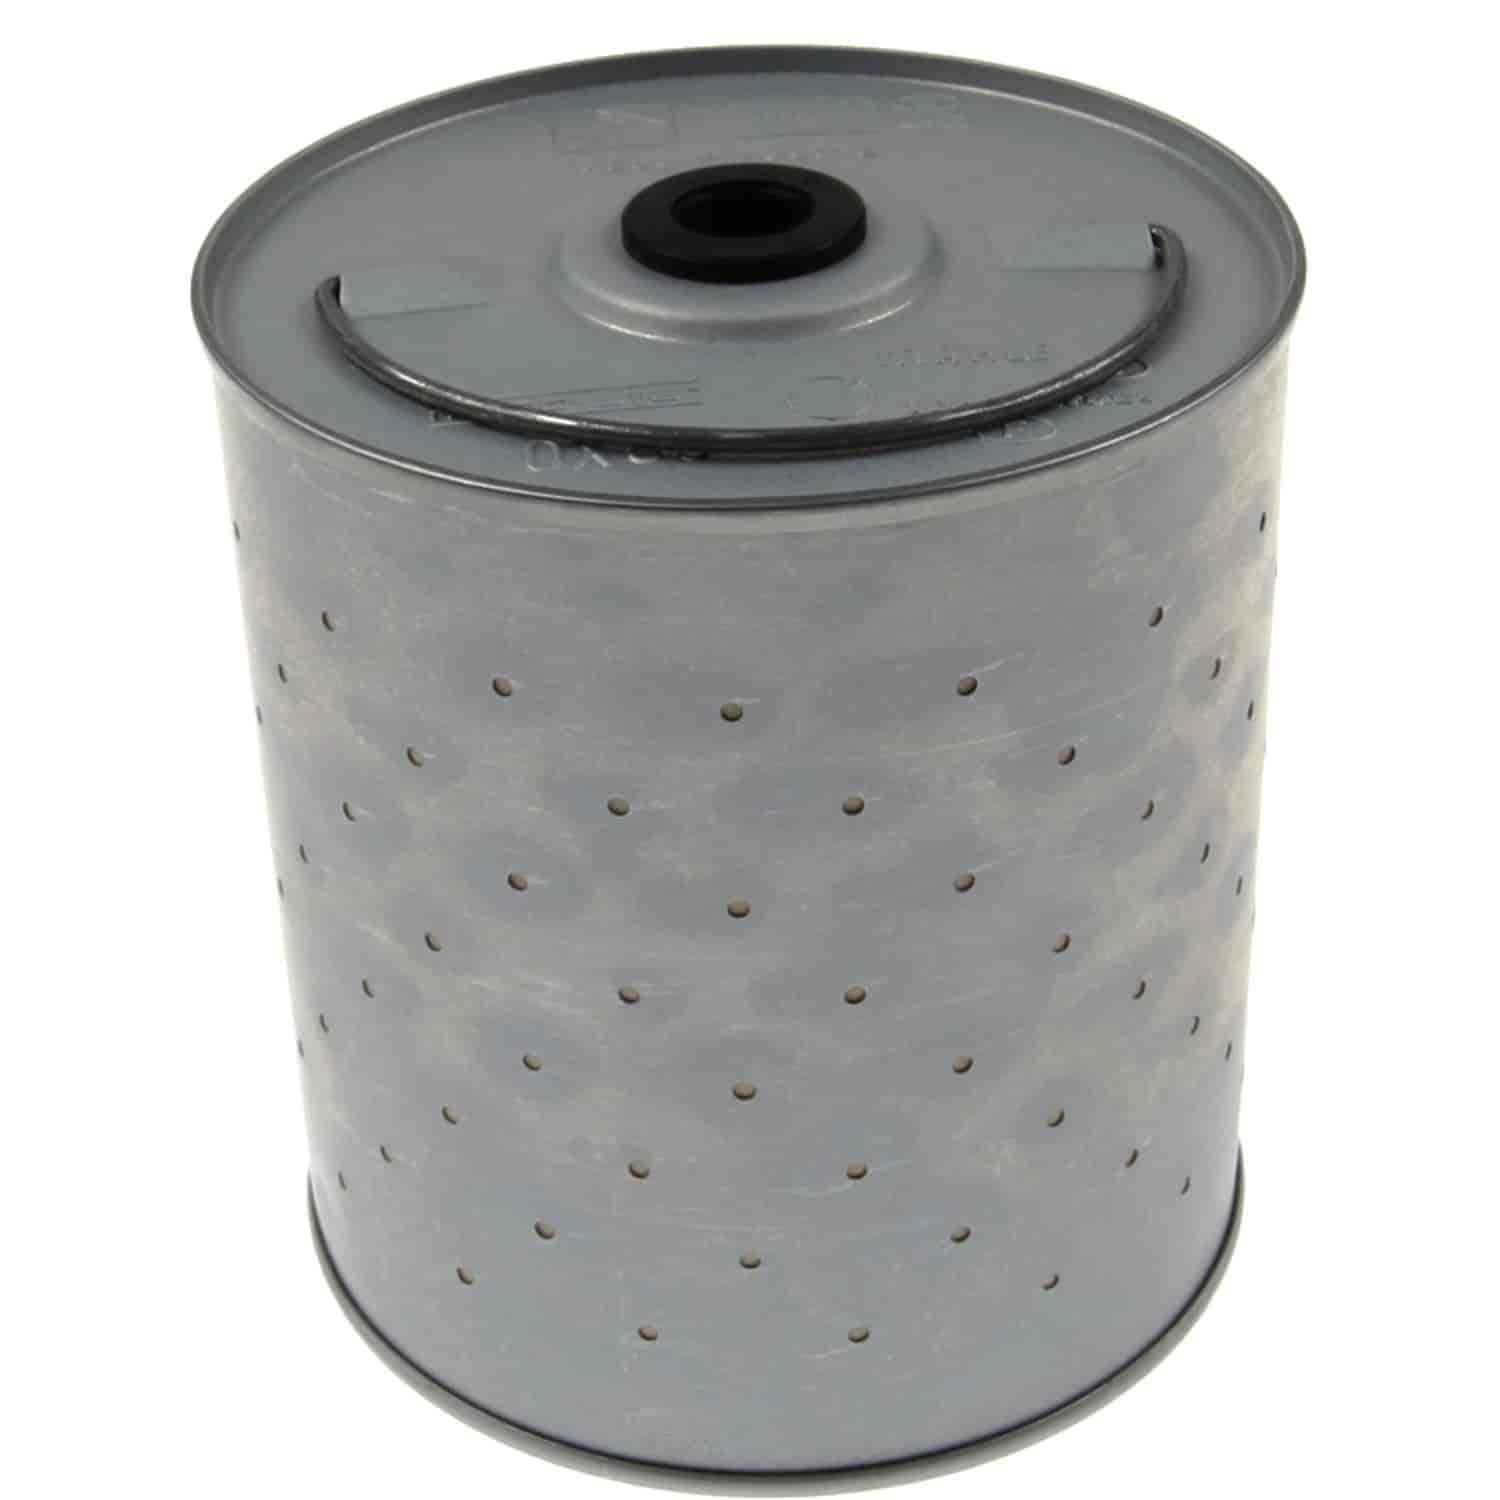 Mahle Oil Filter Mercedes Benz OM-Series engines and bus 300and 310 Series applications